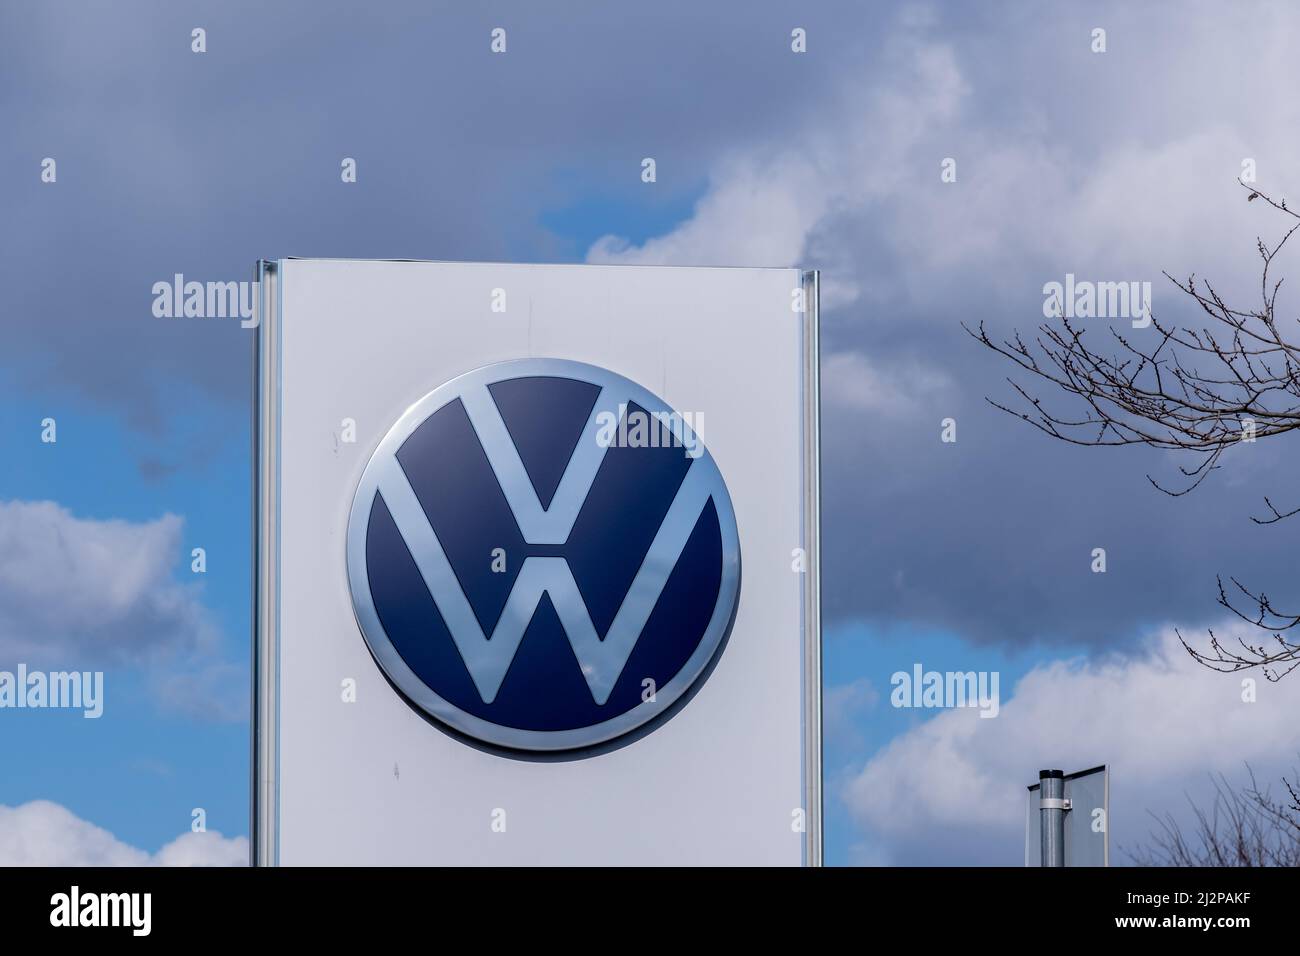 Helsinki / Finland - APRIL 3, 2022: Closeup of a signpost with Volkswagen logo against a bright blue sky Stock Photo